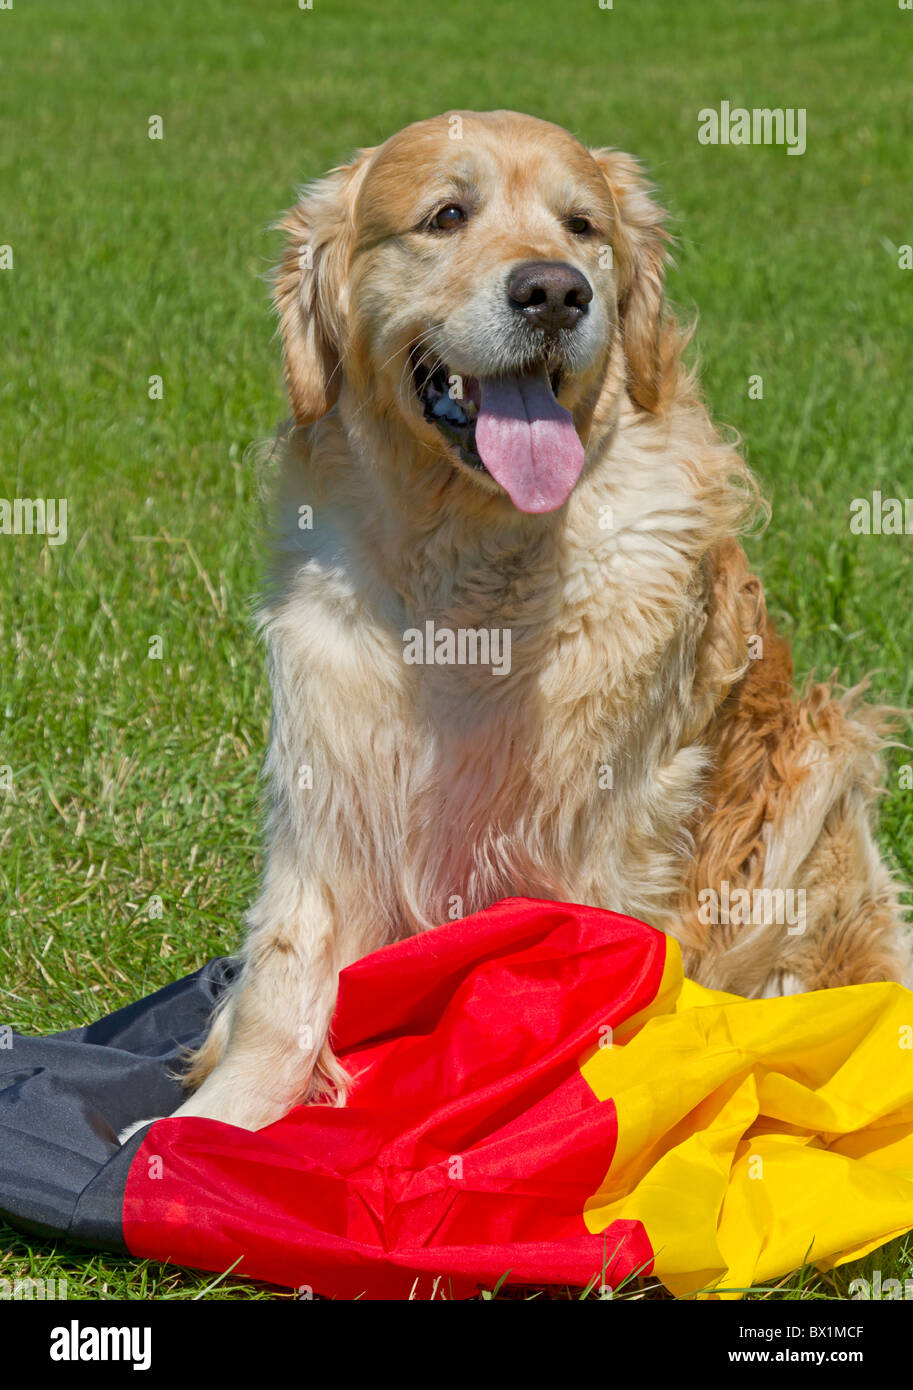 Golden Retriever sitting on a Germany banner Stock Photo